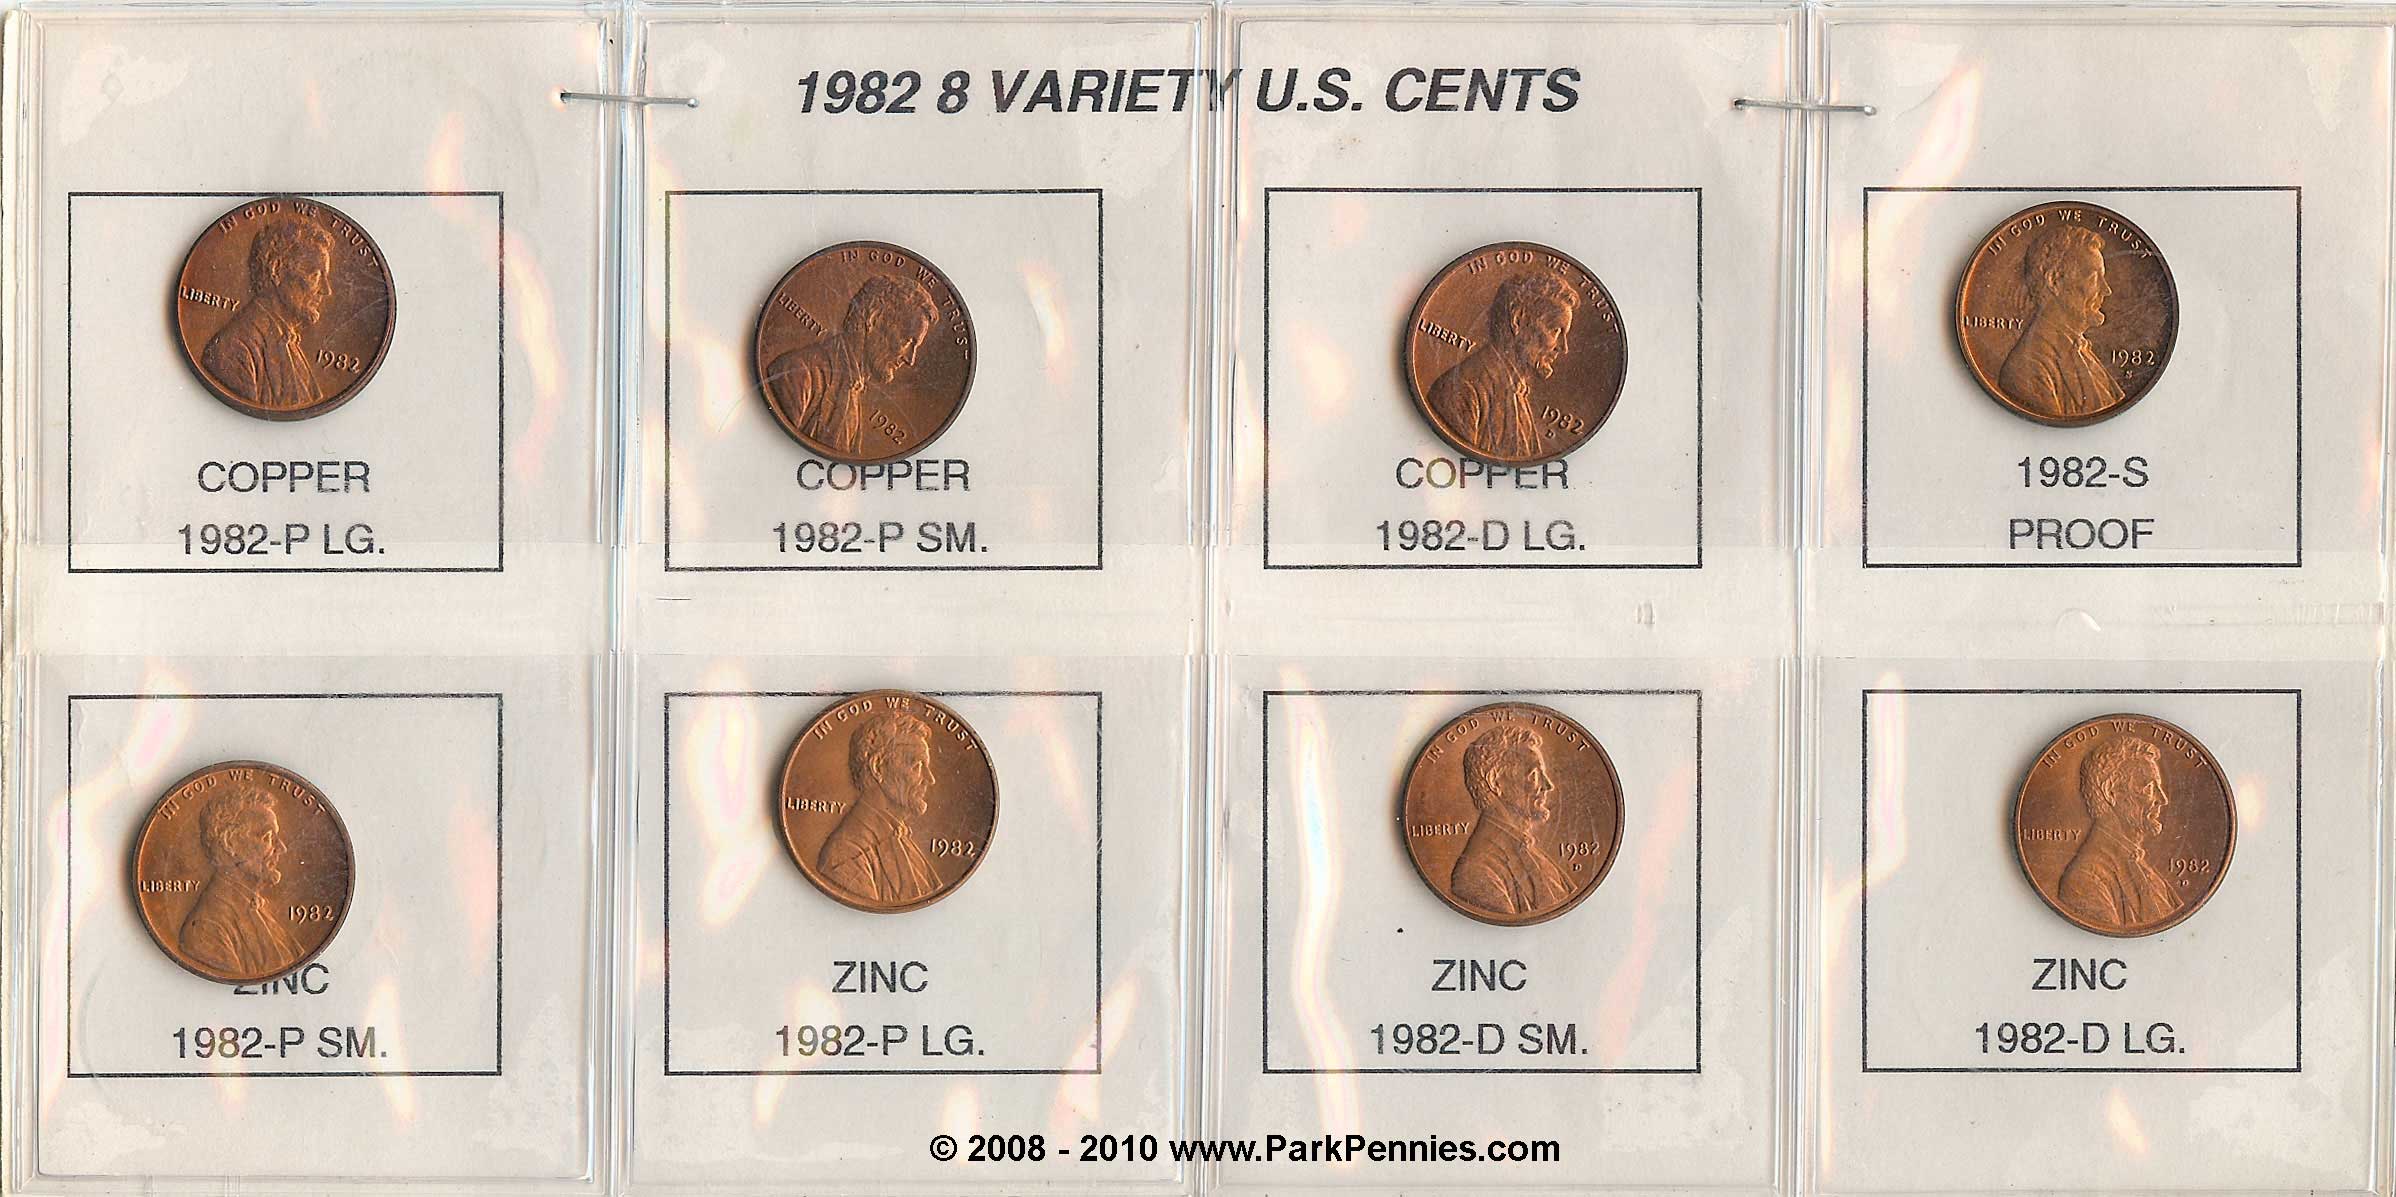 How much copper is in a penny?